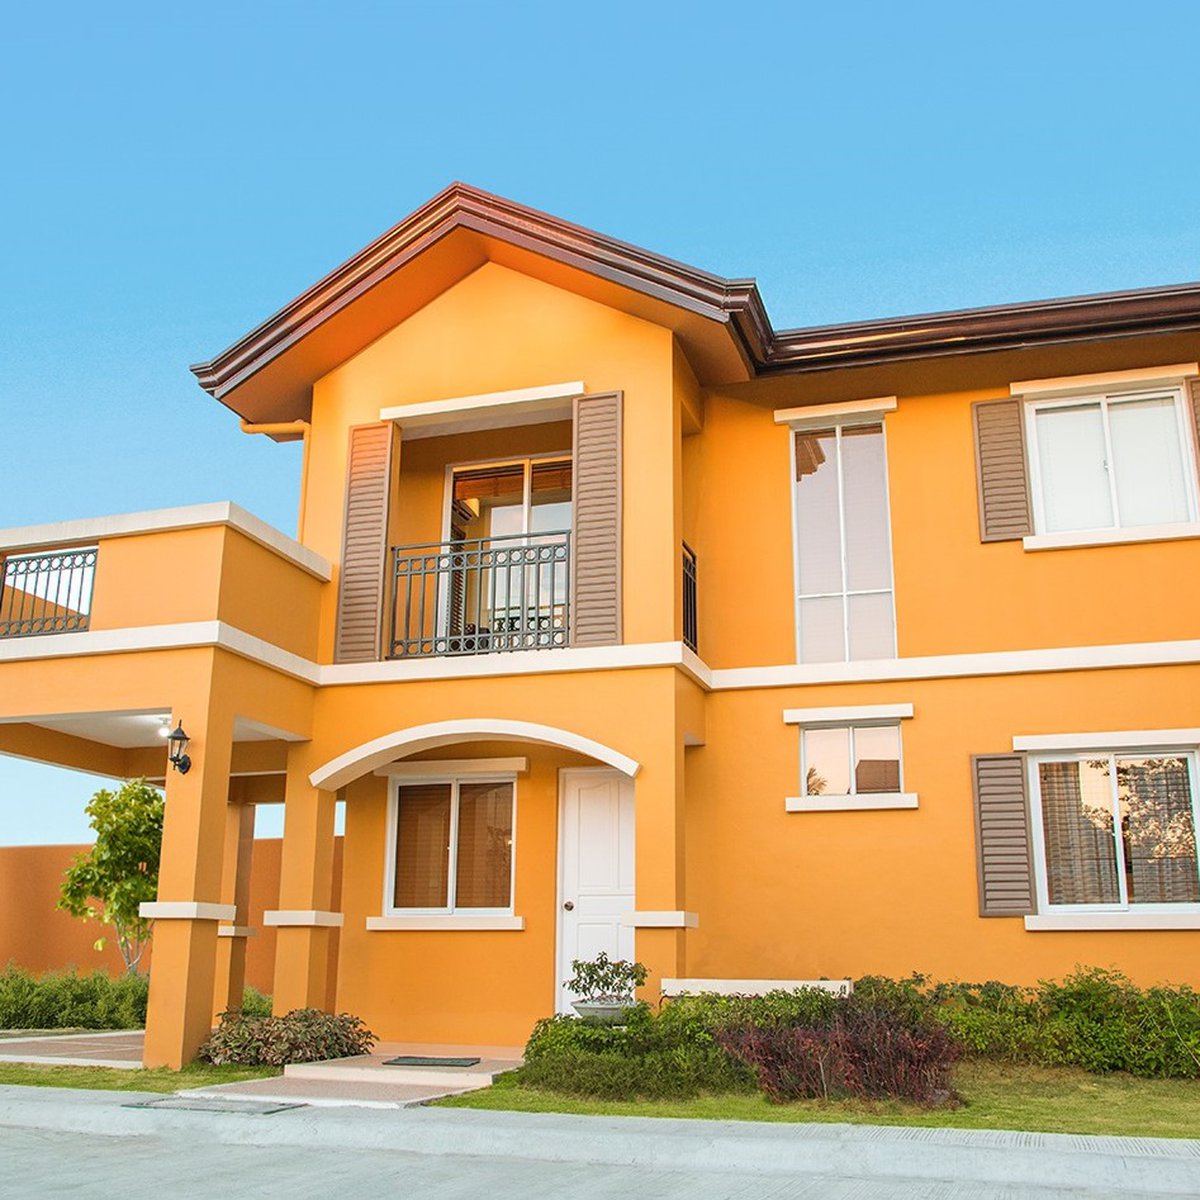 5-bedroom Single Attached House For Sale in Tuguegarao Cagayan